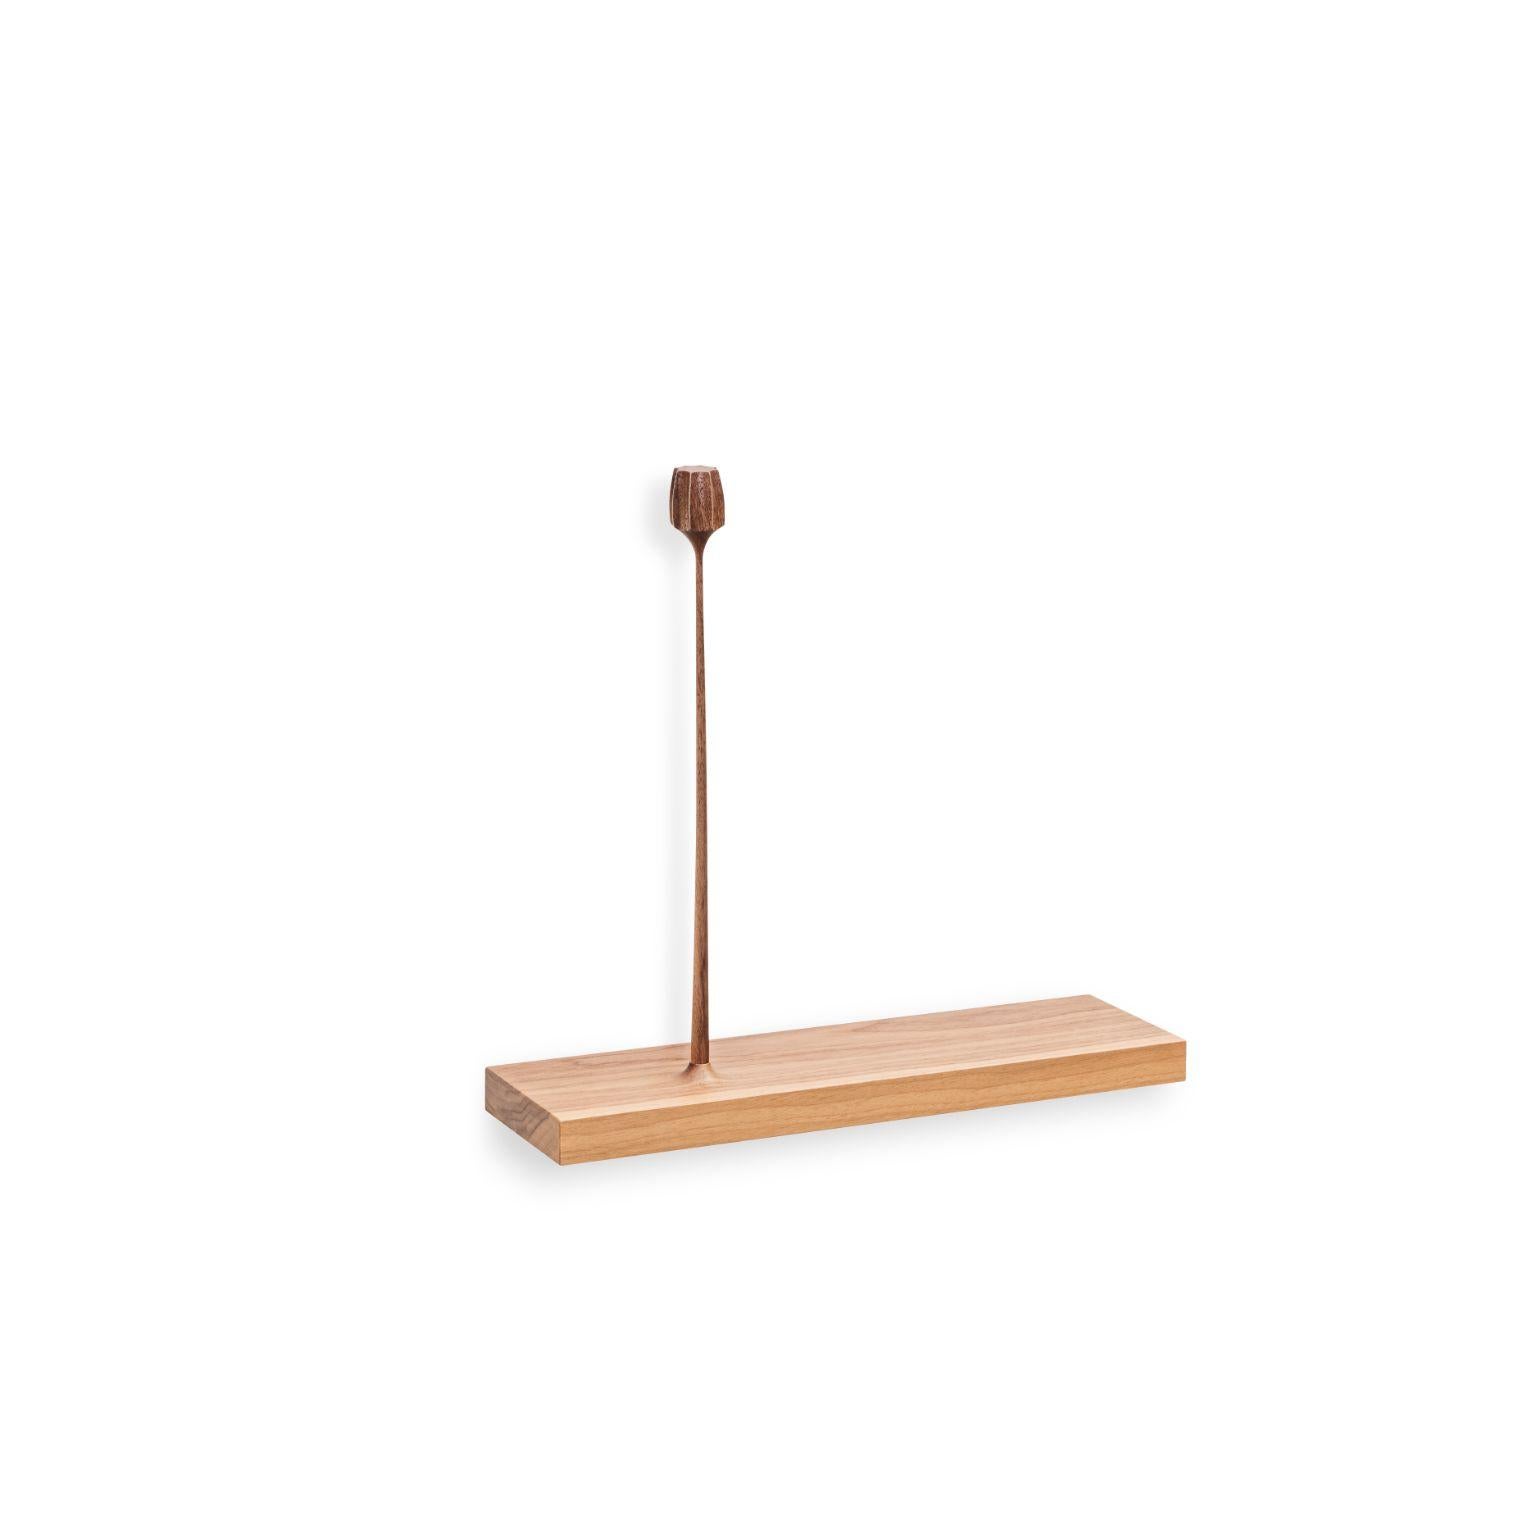 Light Kukkii sculpture 1 flower by Antrei Hartikainen.
Materials: black stained oak, natural oil waxed walnut.
Dimensions: W 75 / 60 / 40 cm, D 10 cm, H 34 / 42 cm.

Also available: dark color & different flower amounts.

Kukkii (blooms) is a